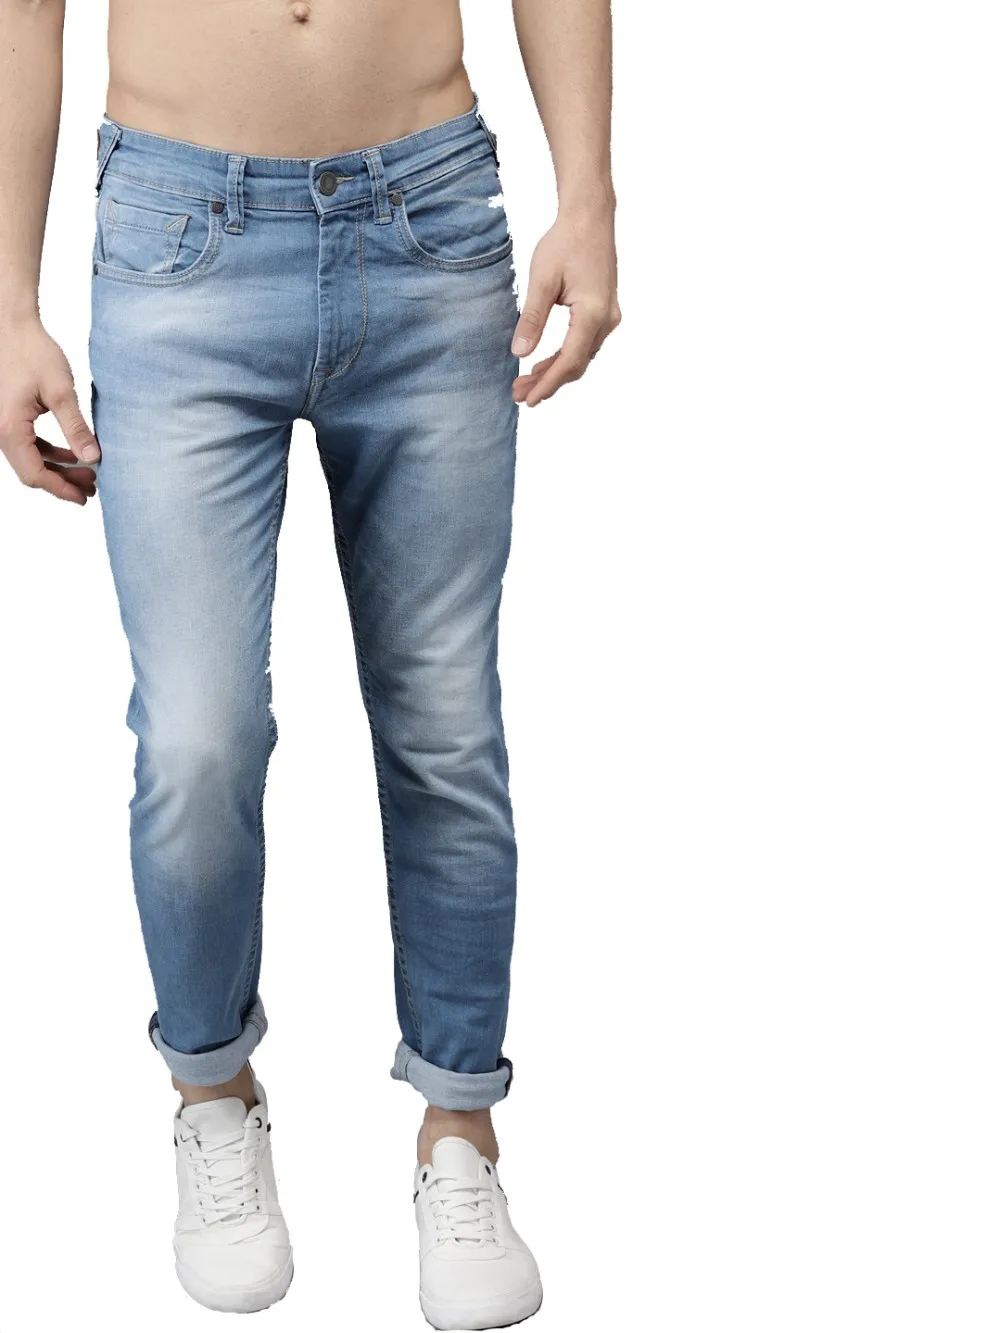 High Stretch Denim Jeans For Fat Guys Top Quality Fashion Ripped Jeans ...